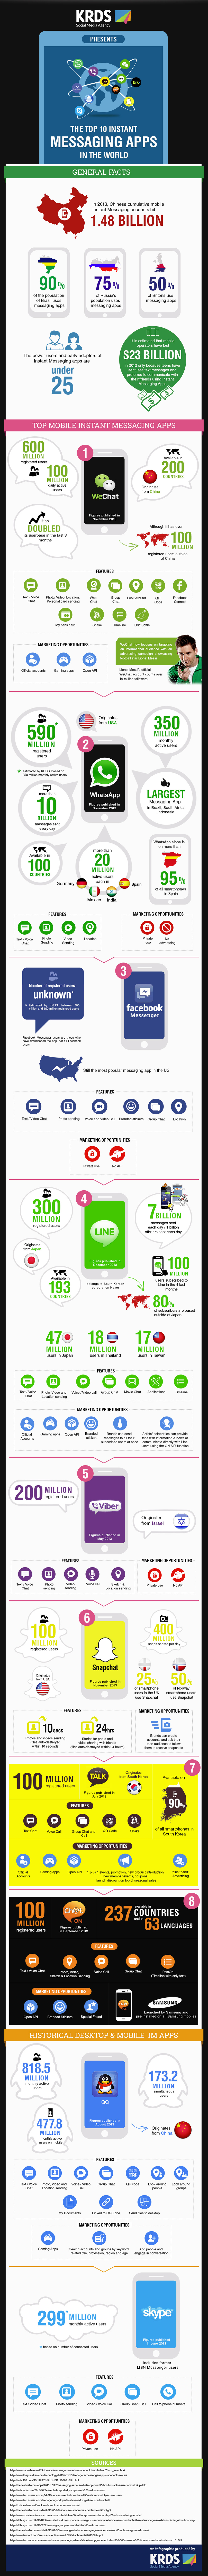 Instant Messaging Apps Facts & Figures